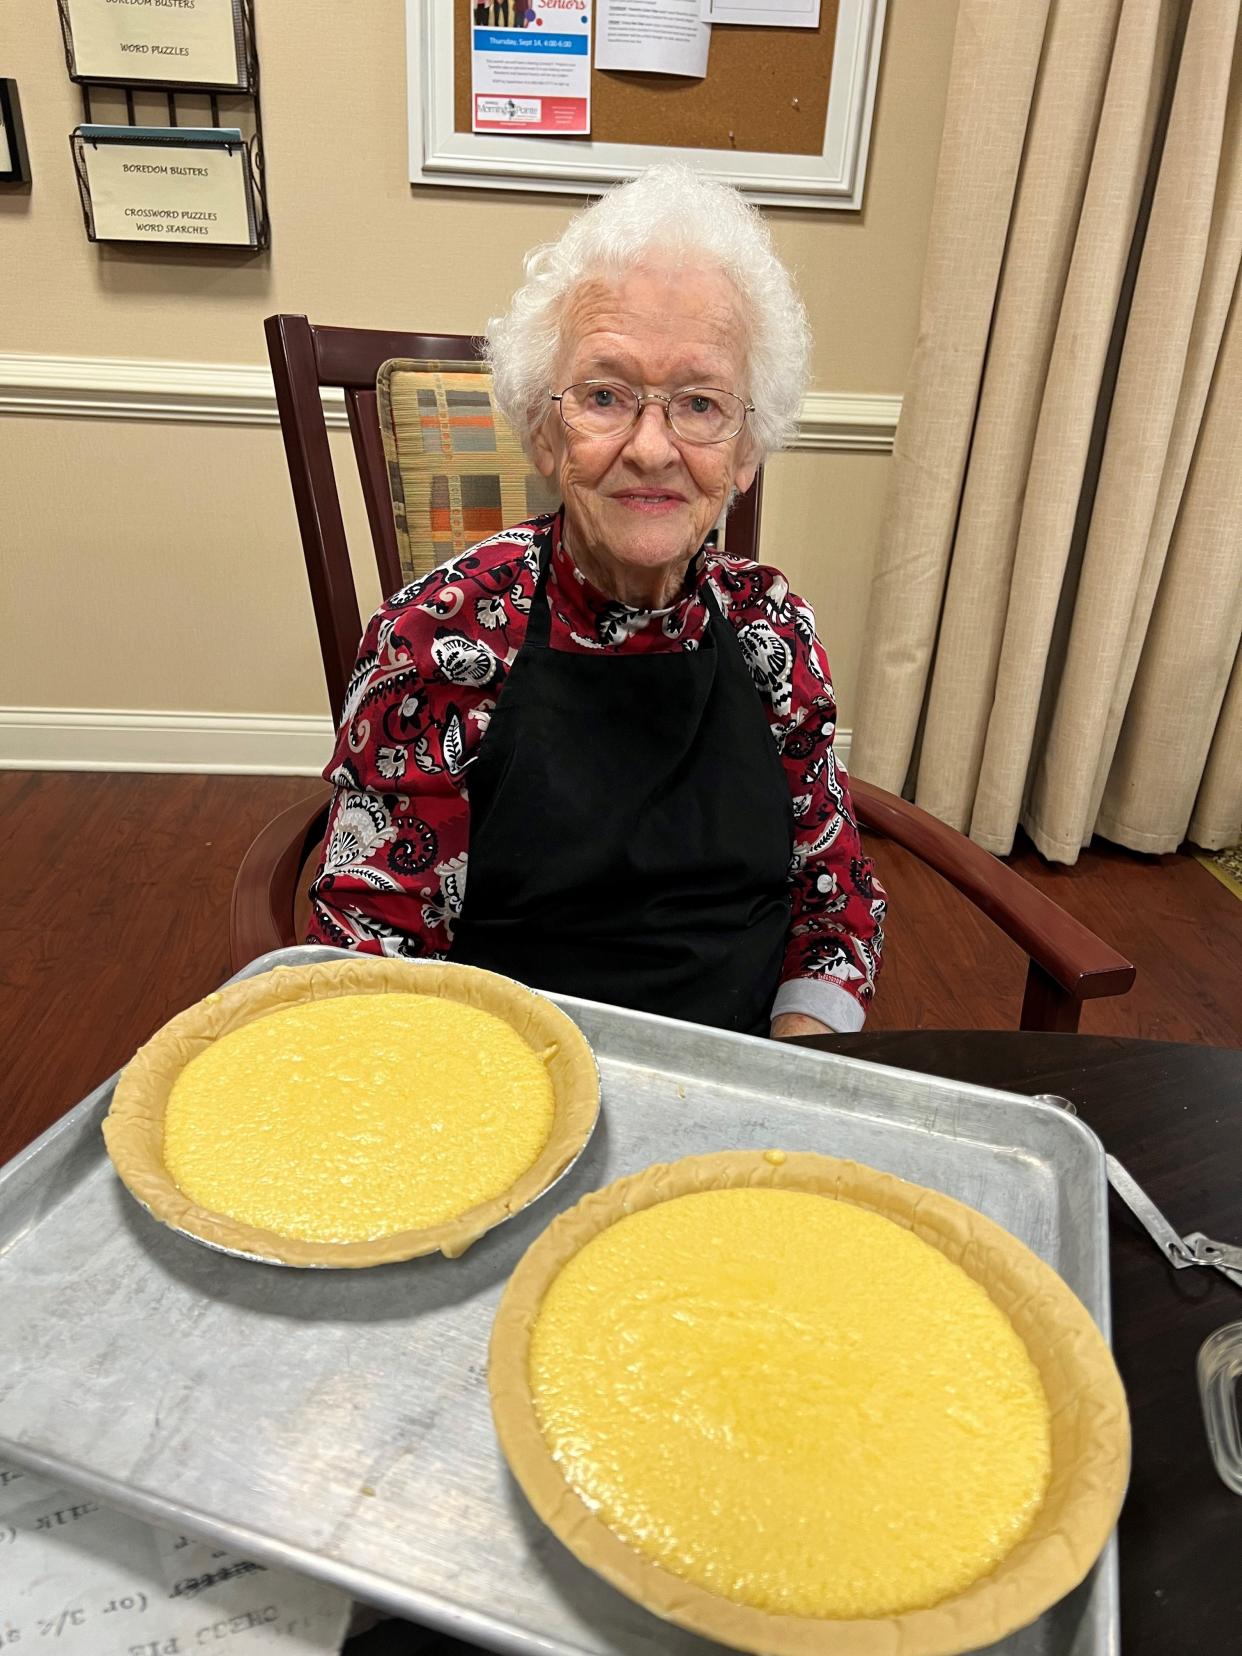 Cleo Wayman proudly admires her pie that won the baking championship at Morning Pointe.